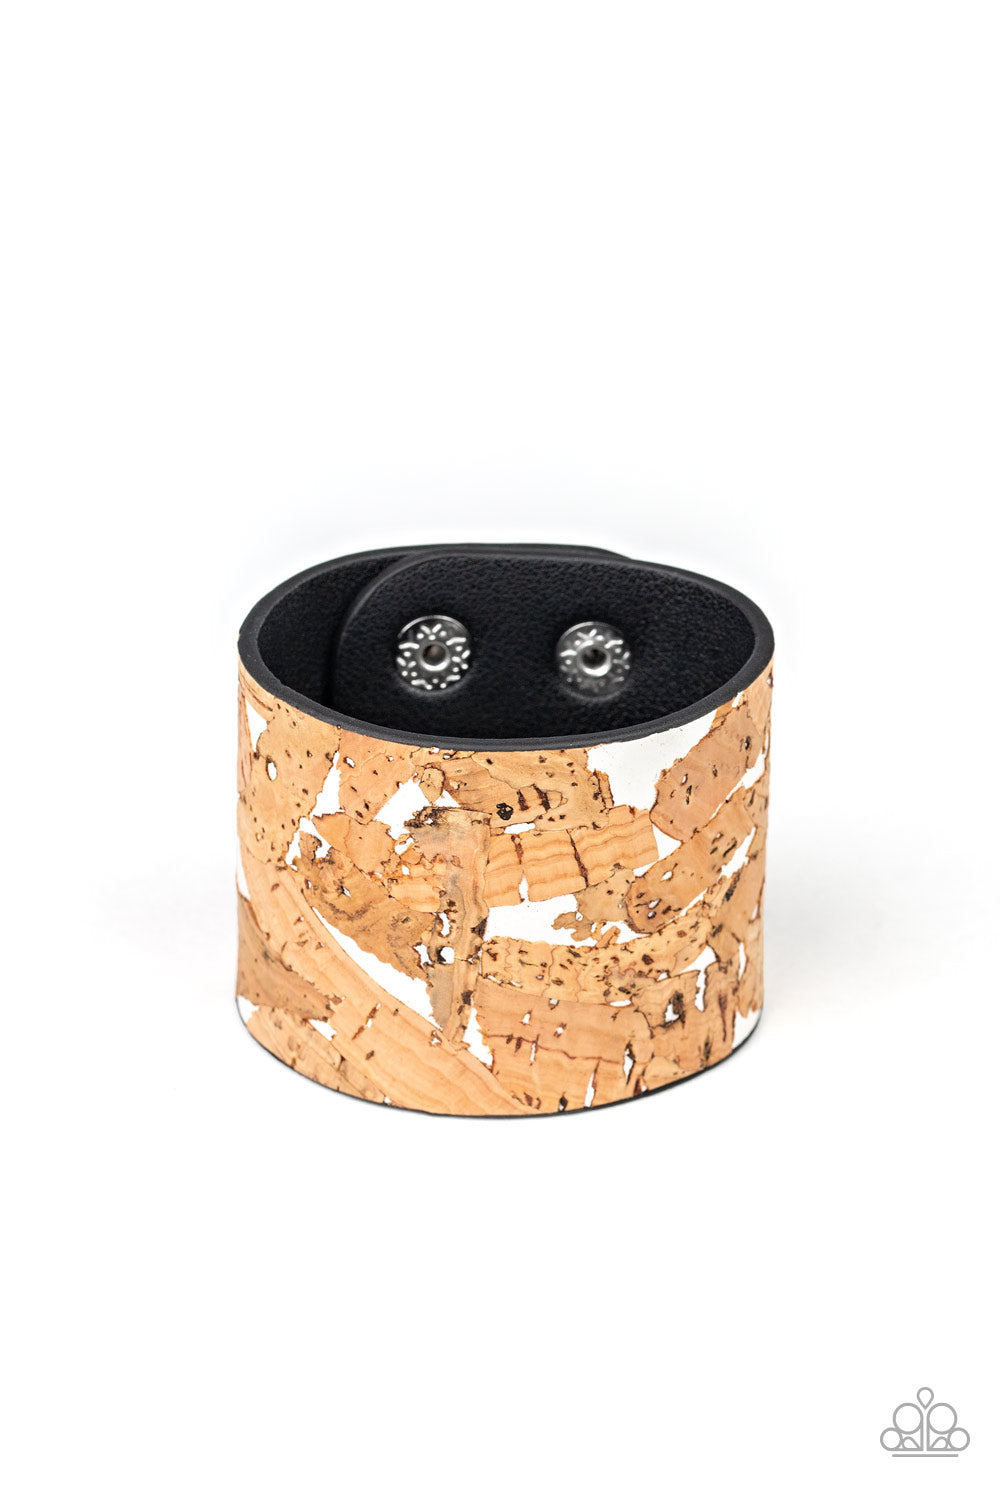 Cork Congo - White Cork and Leather Bracelet - Paparazzi Accessories - Pieces of cork have been plastered across the front of a shiny white leather band, creating an earthy look around the wrist. Features an adjustable snap closure. Sold as one individual bracelet.